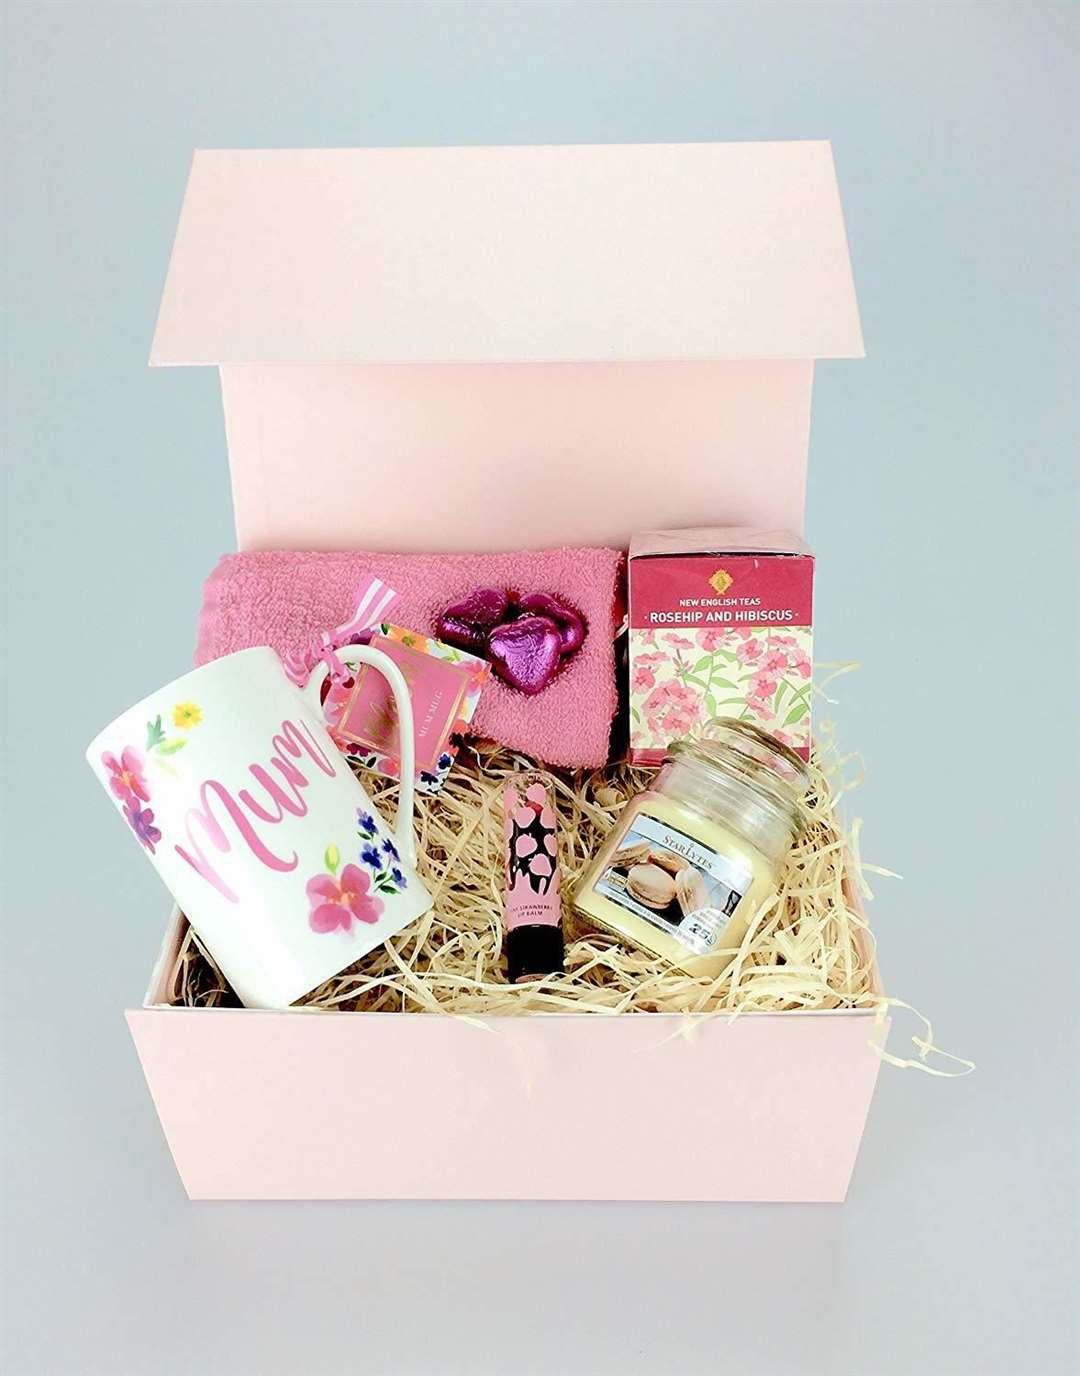 From lip balm to chocolate hearts, there is plenty for mum to choose from!